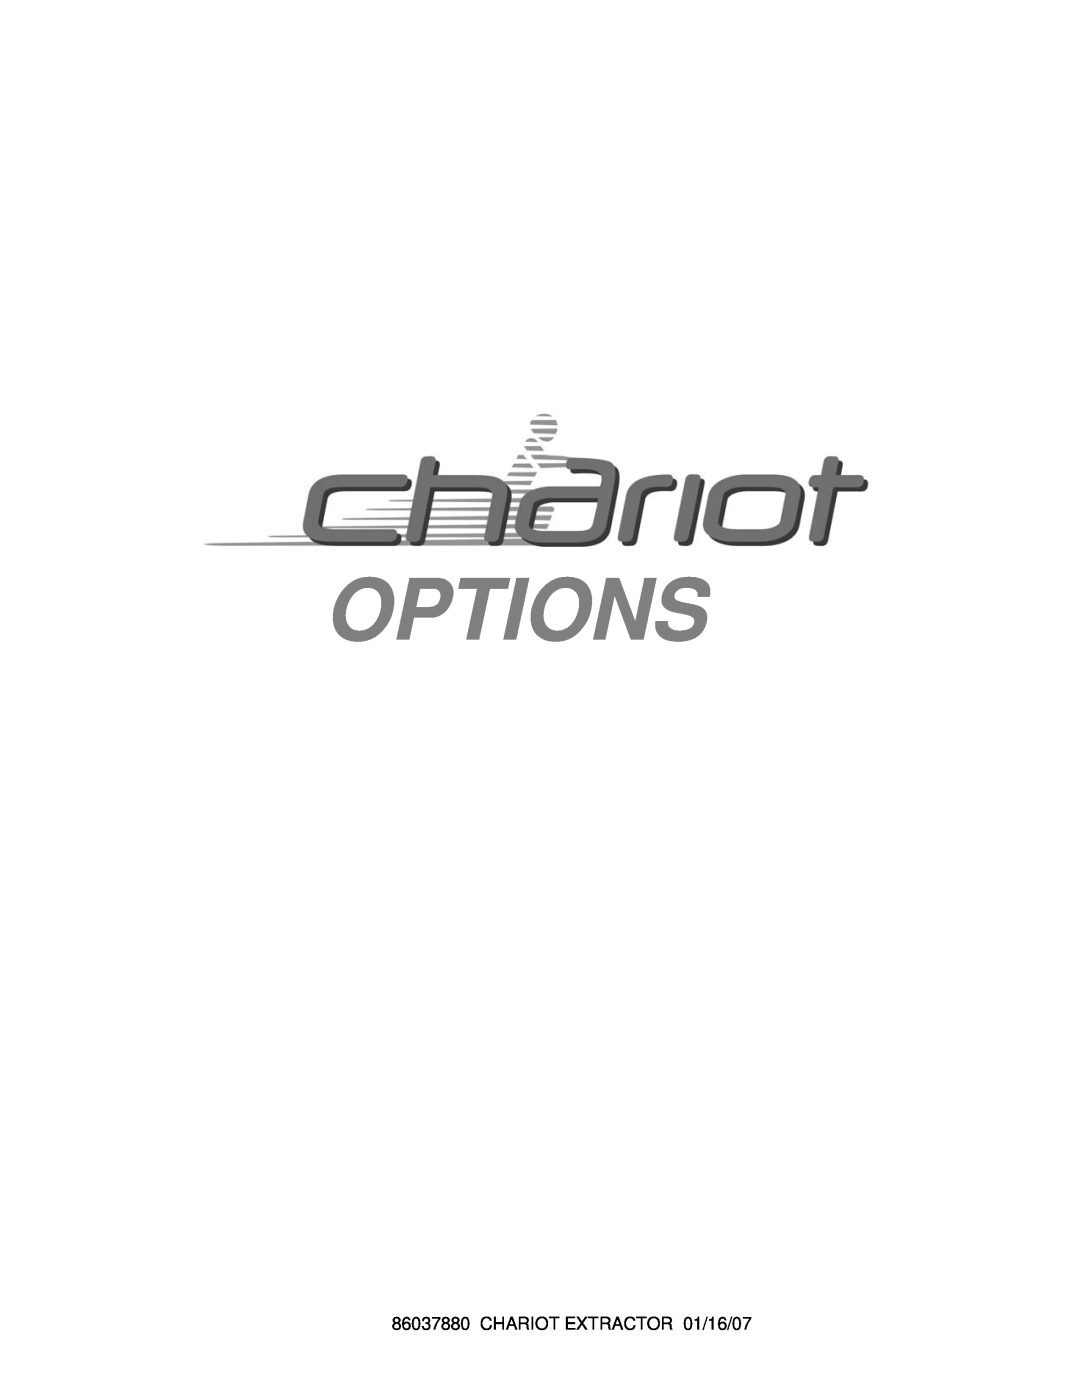 Windsor CEE24, 86037880, CE24X manual Options, CHARIOT EXTRACTOR 01/16/07 